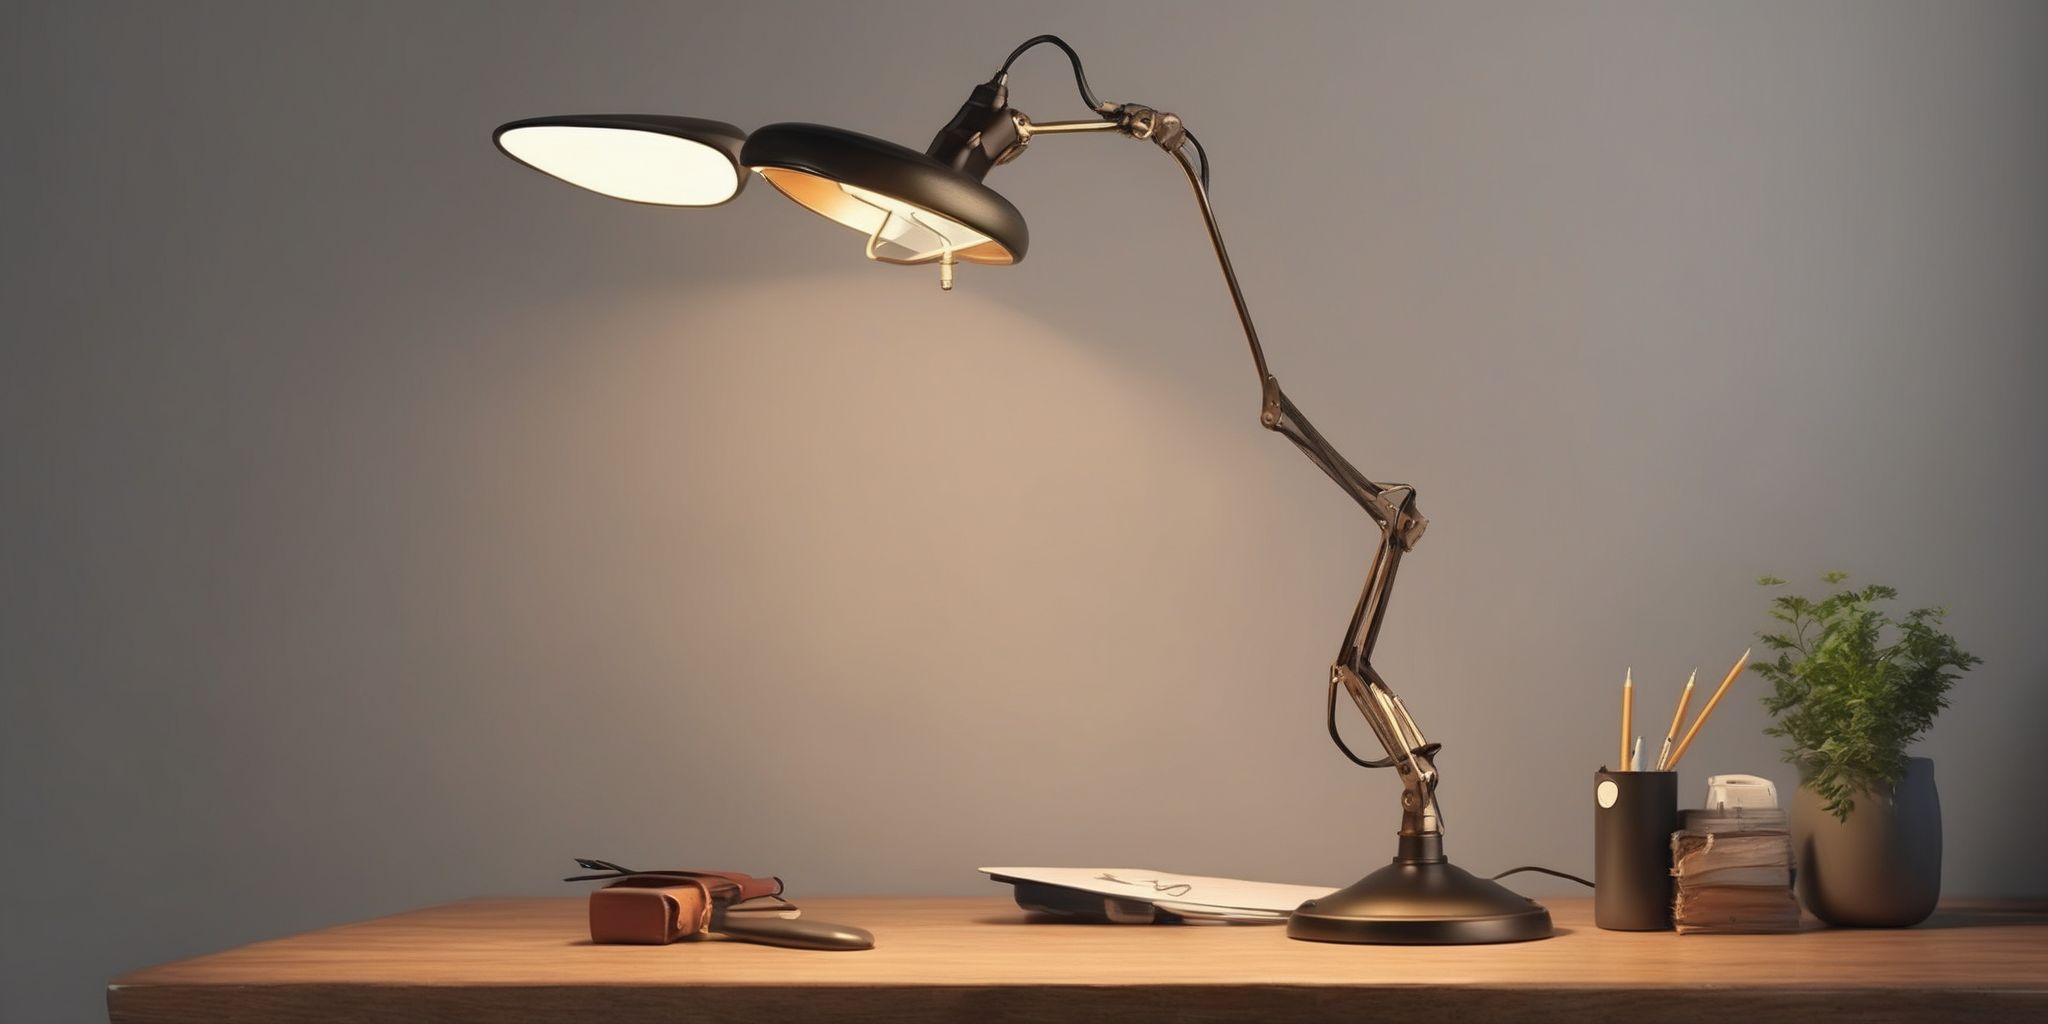 Desk lamp  in realistic, photographic style